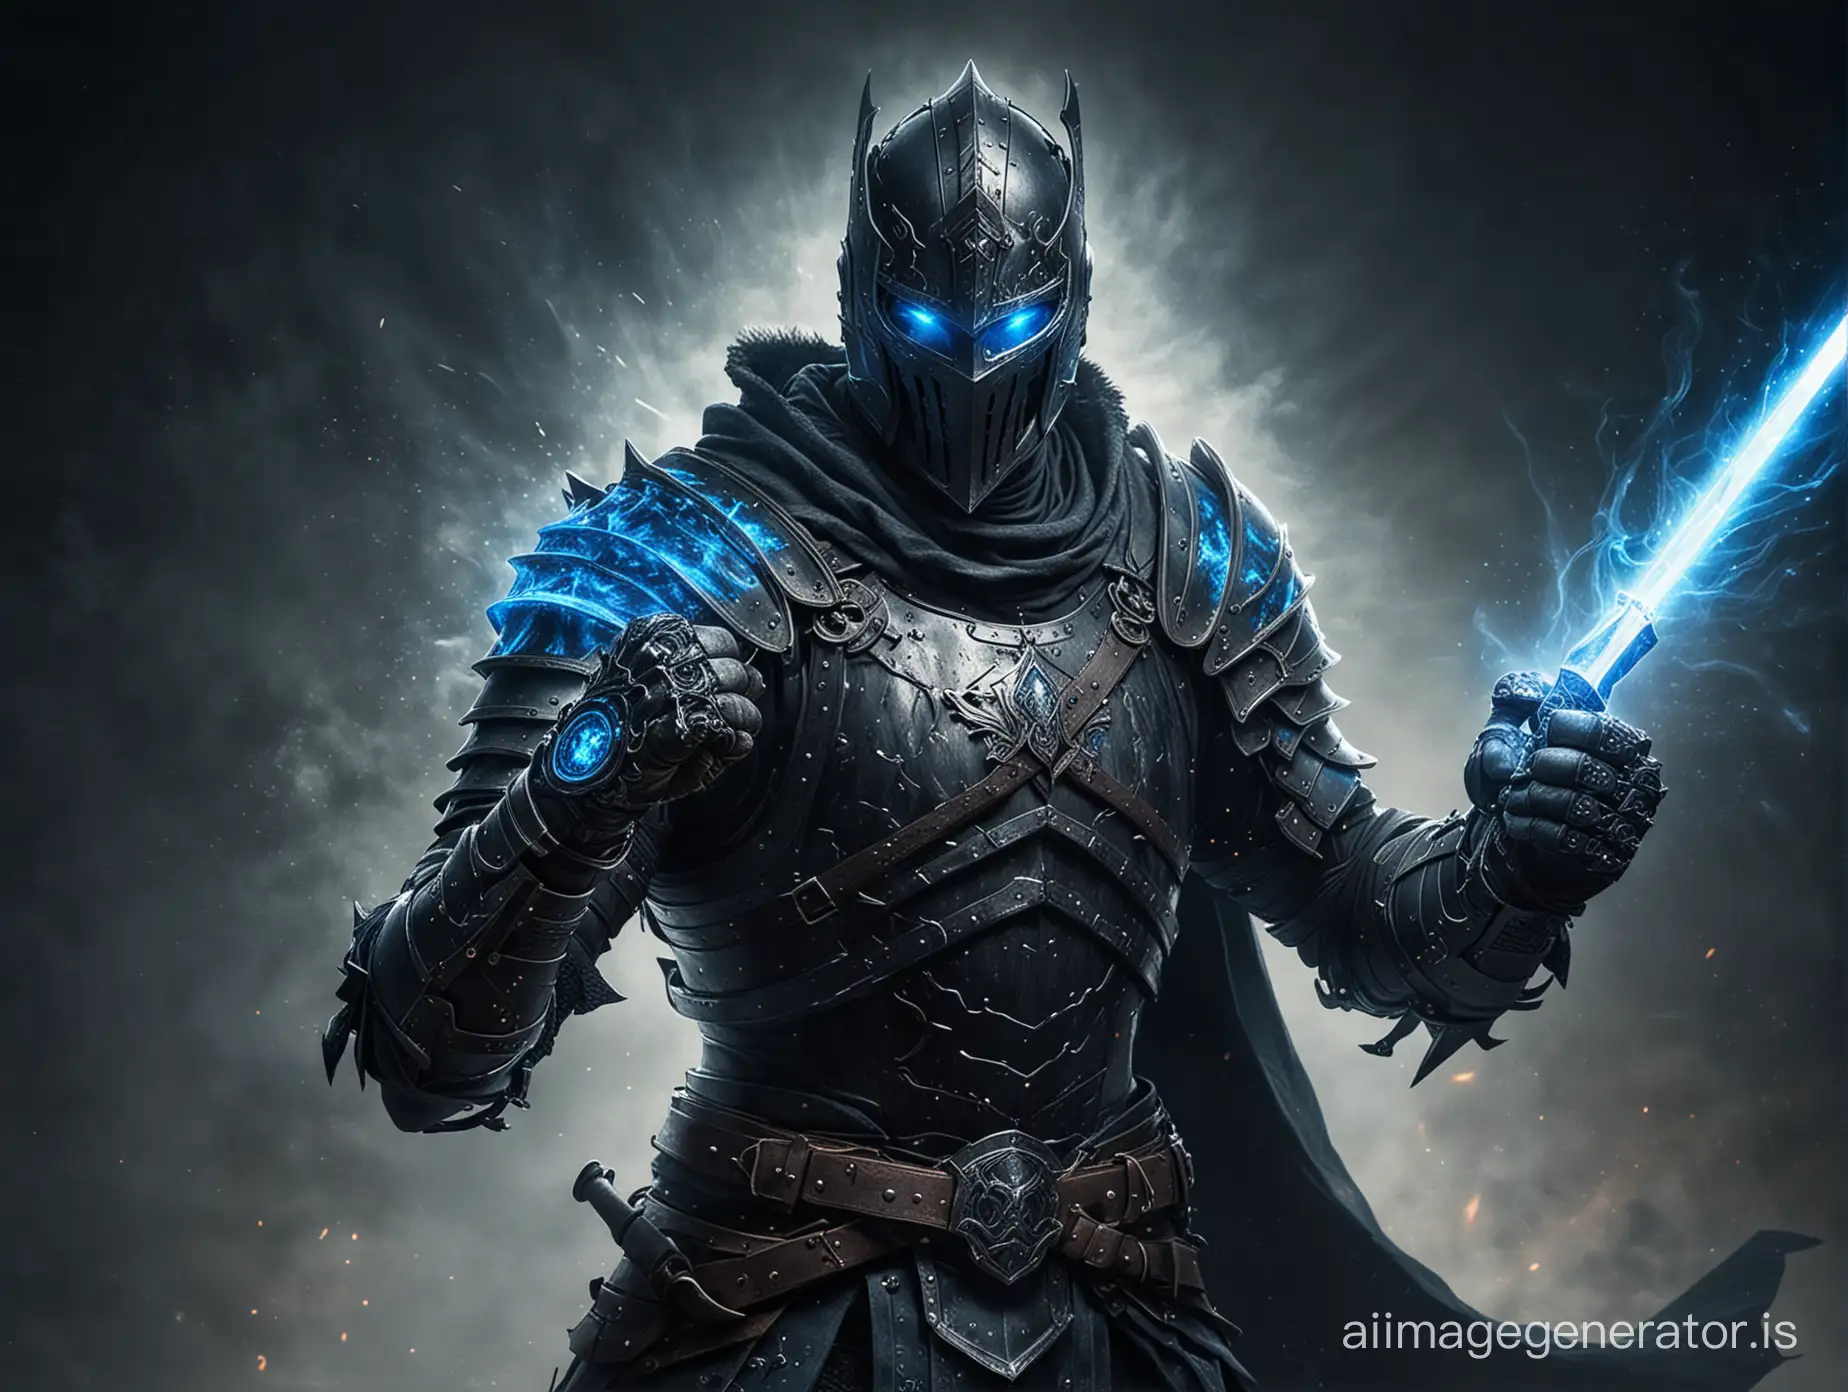 Medieval-Knight-with-Glowing-Blue-Eyes-and-Magic-Aura-Sword